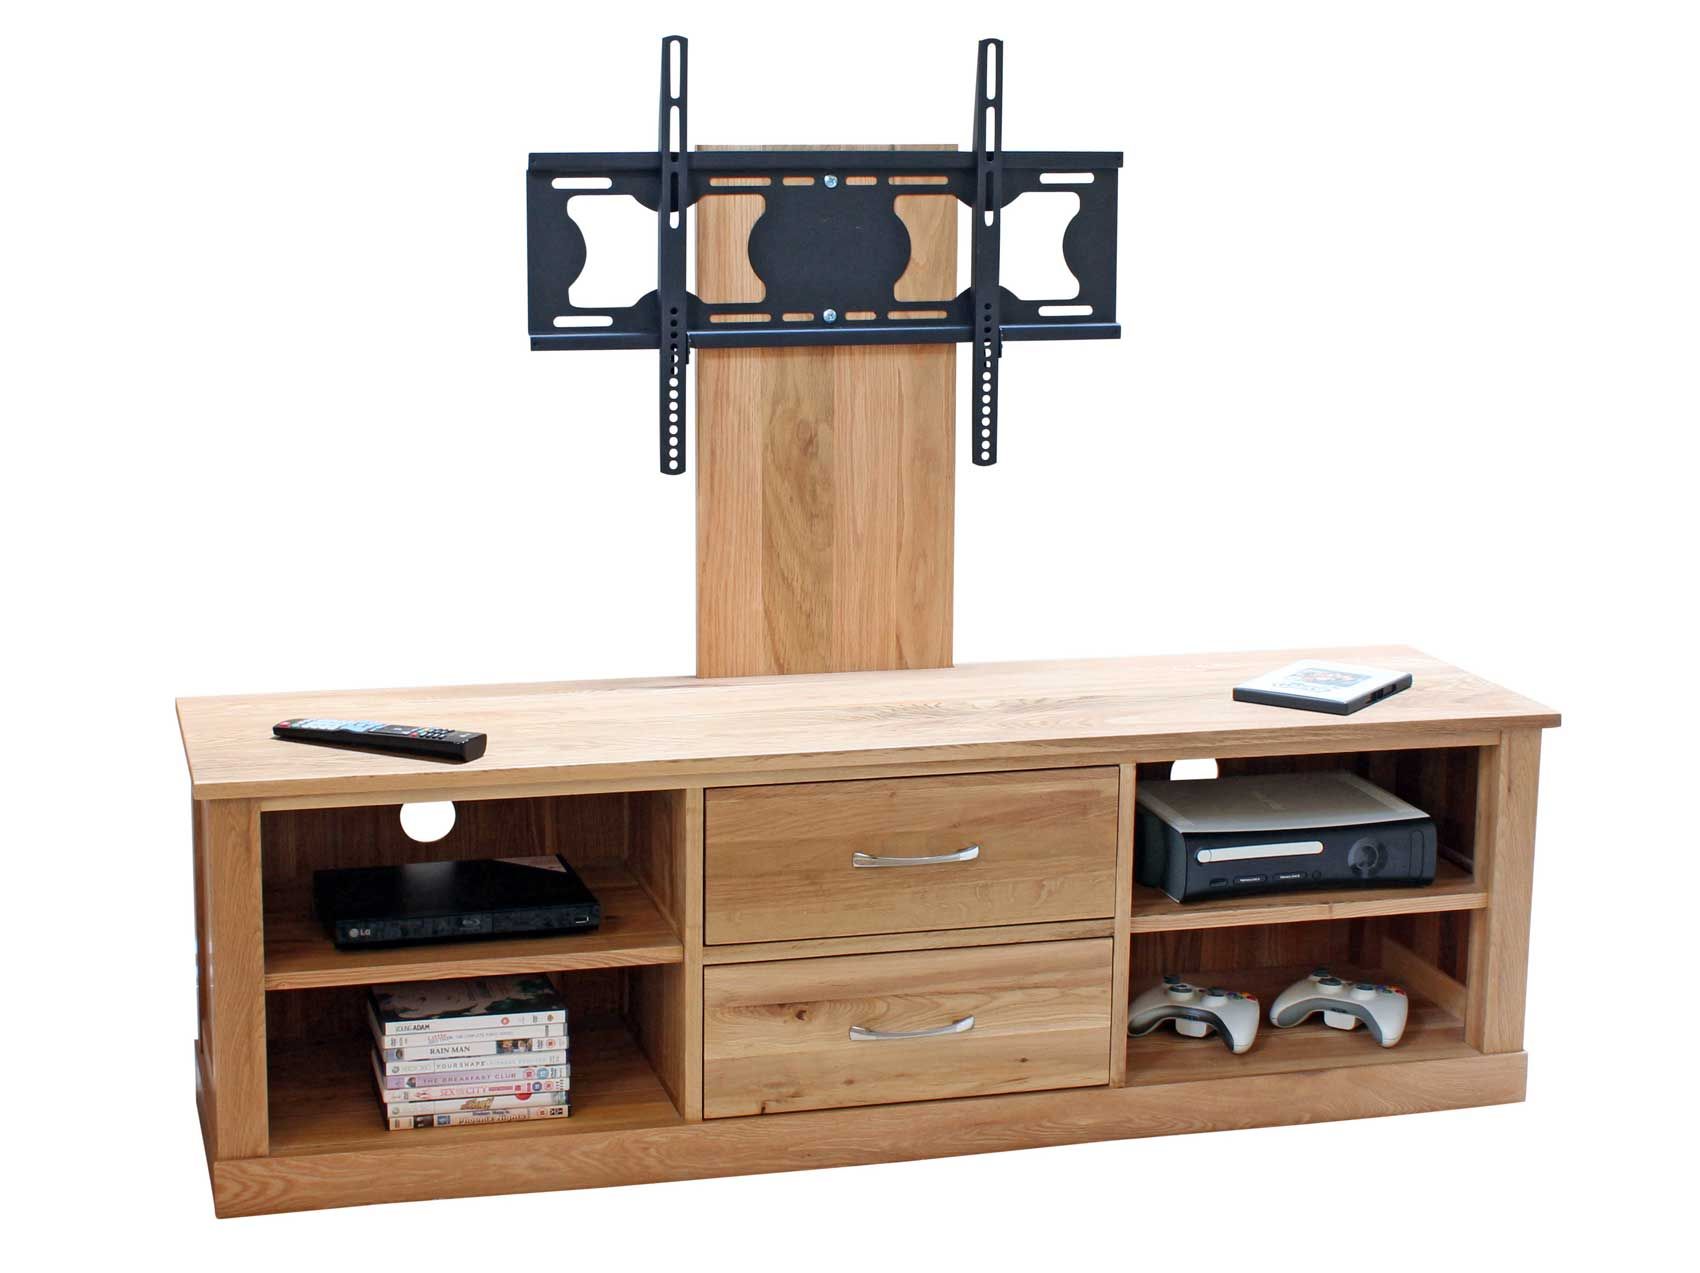 Cool Flat Screen Tv Stands With Mount – Homesfeed Intended For Contemporary Tv Cabinets For Flat Screens (View 13 of 15)